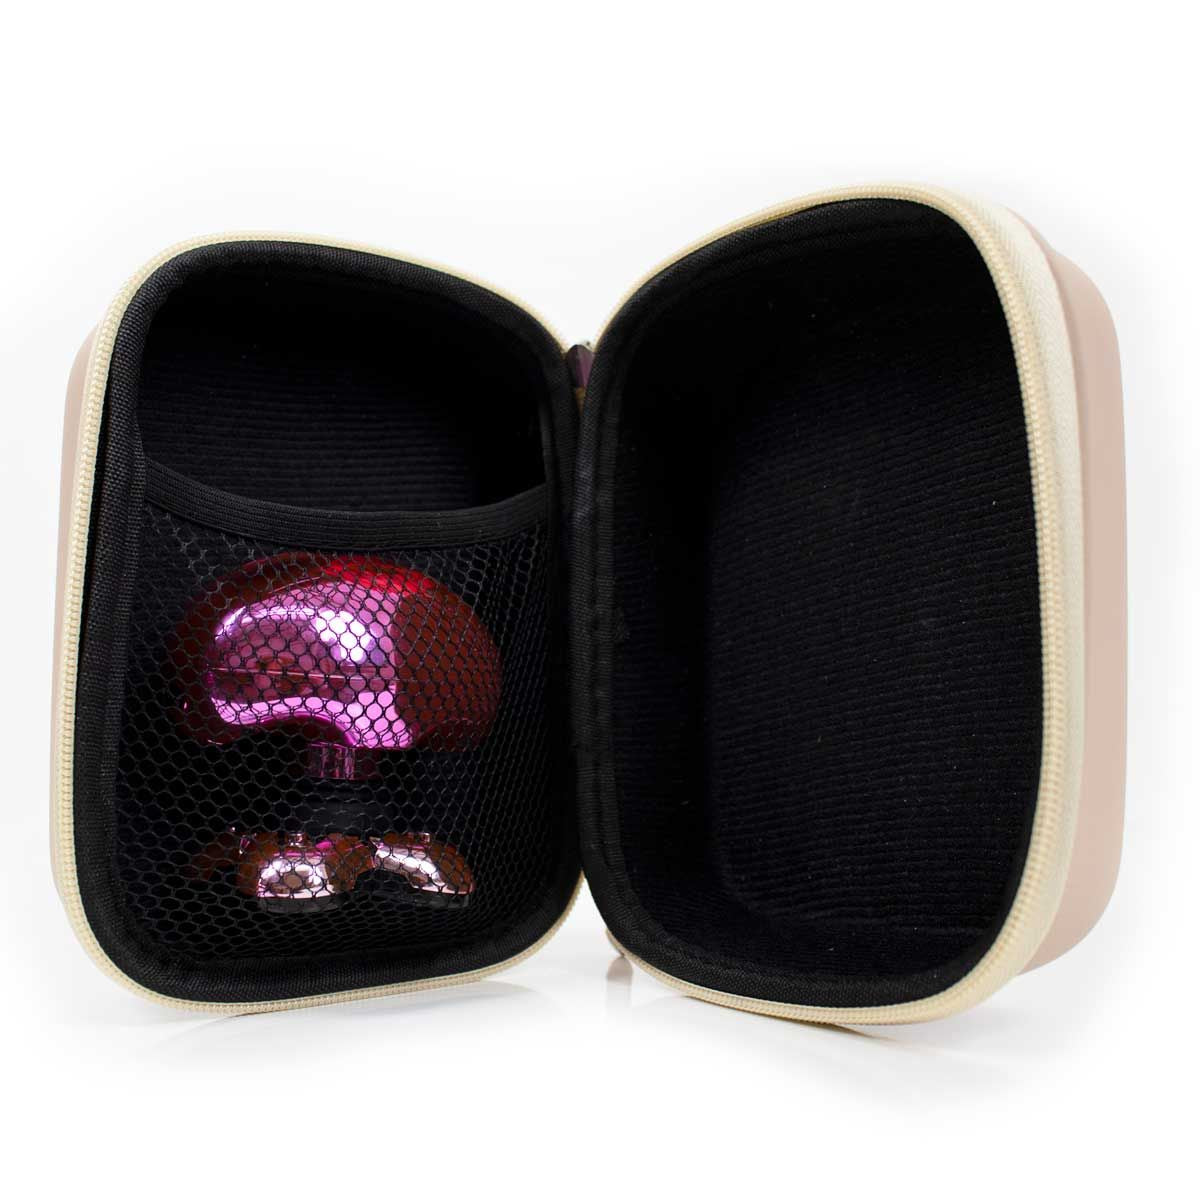 Butterfly Kiss Travel Case comes with a webbed net compartment to safely hold skull shaver